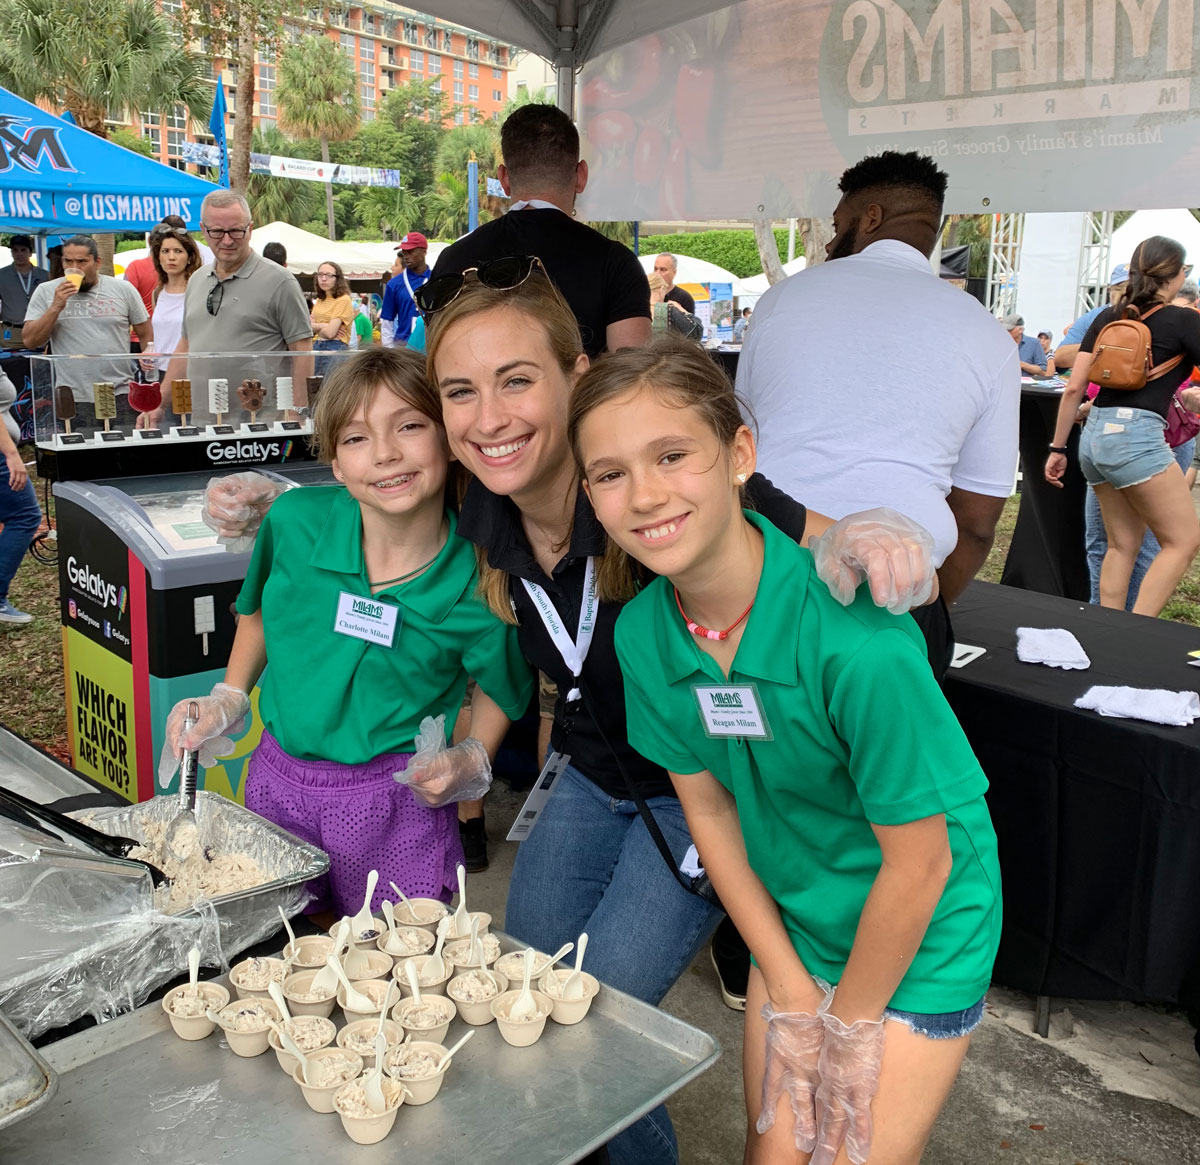 All in the family: Kristie Milam and helpers at their Coconut Grove Arts Festival booth